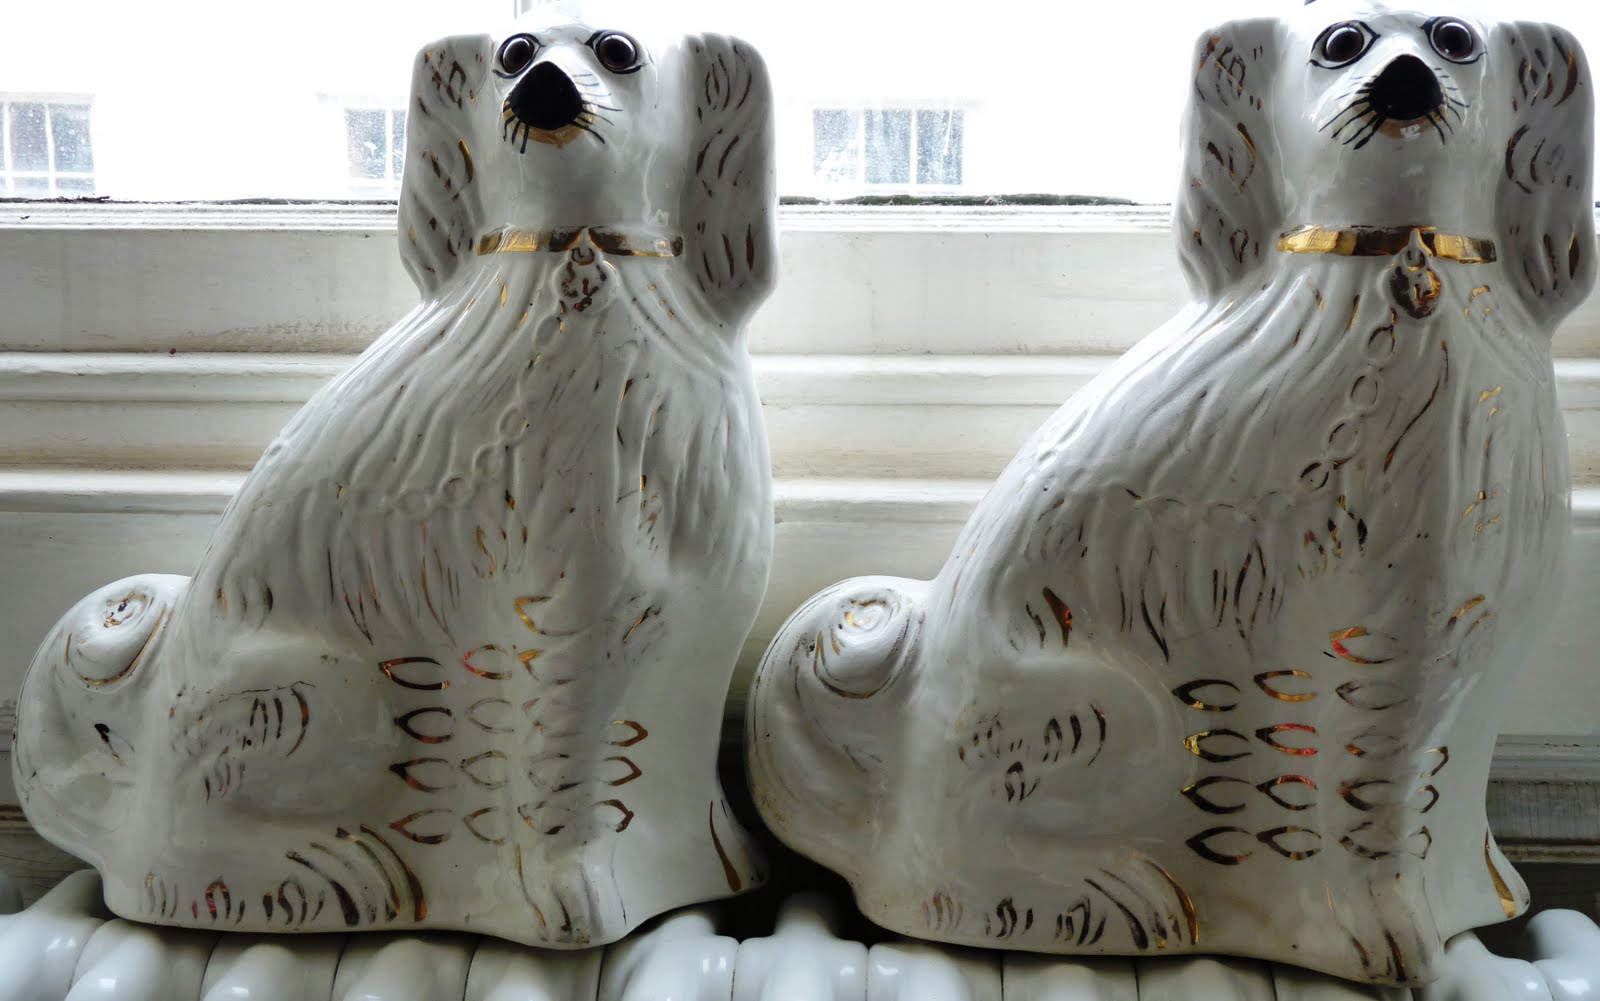 Staffordshire Dogs Pottery